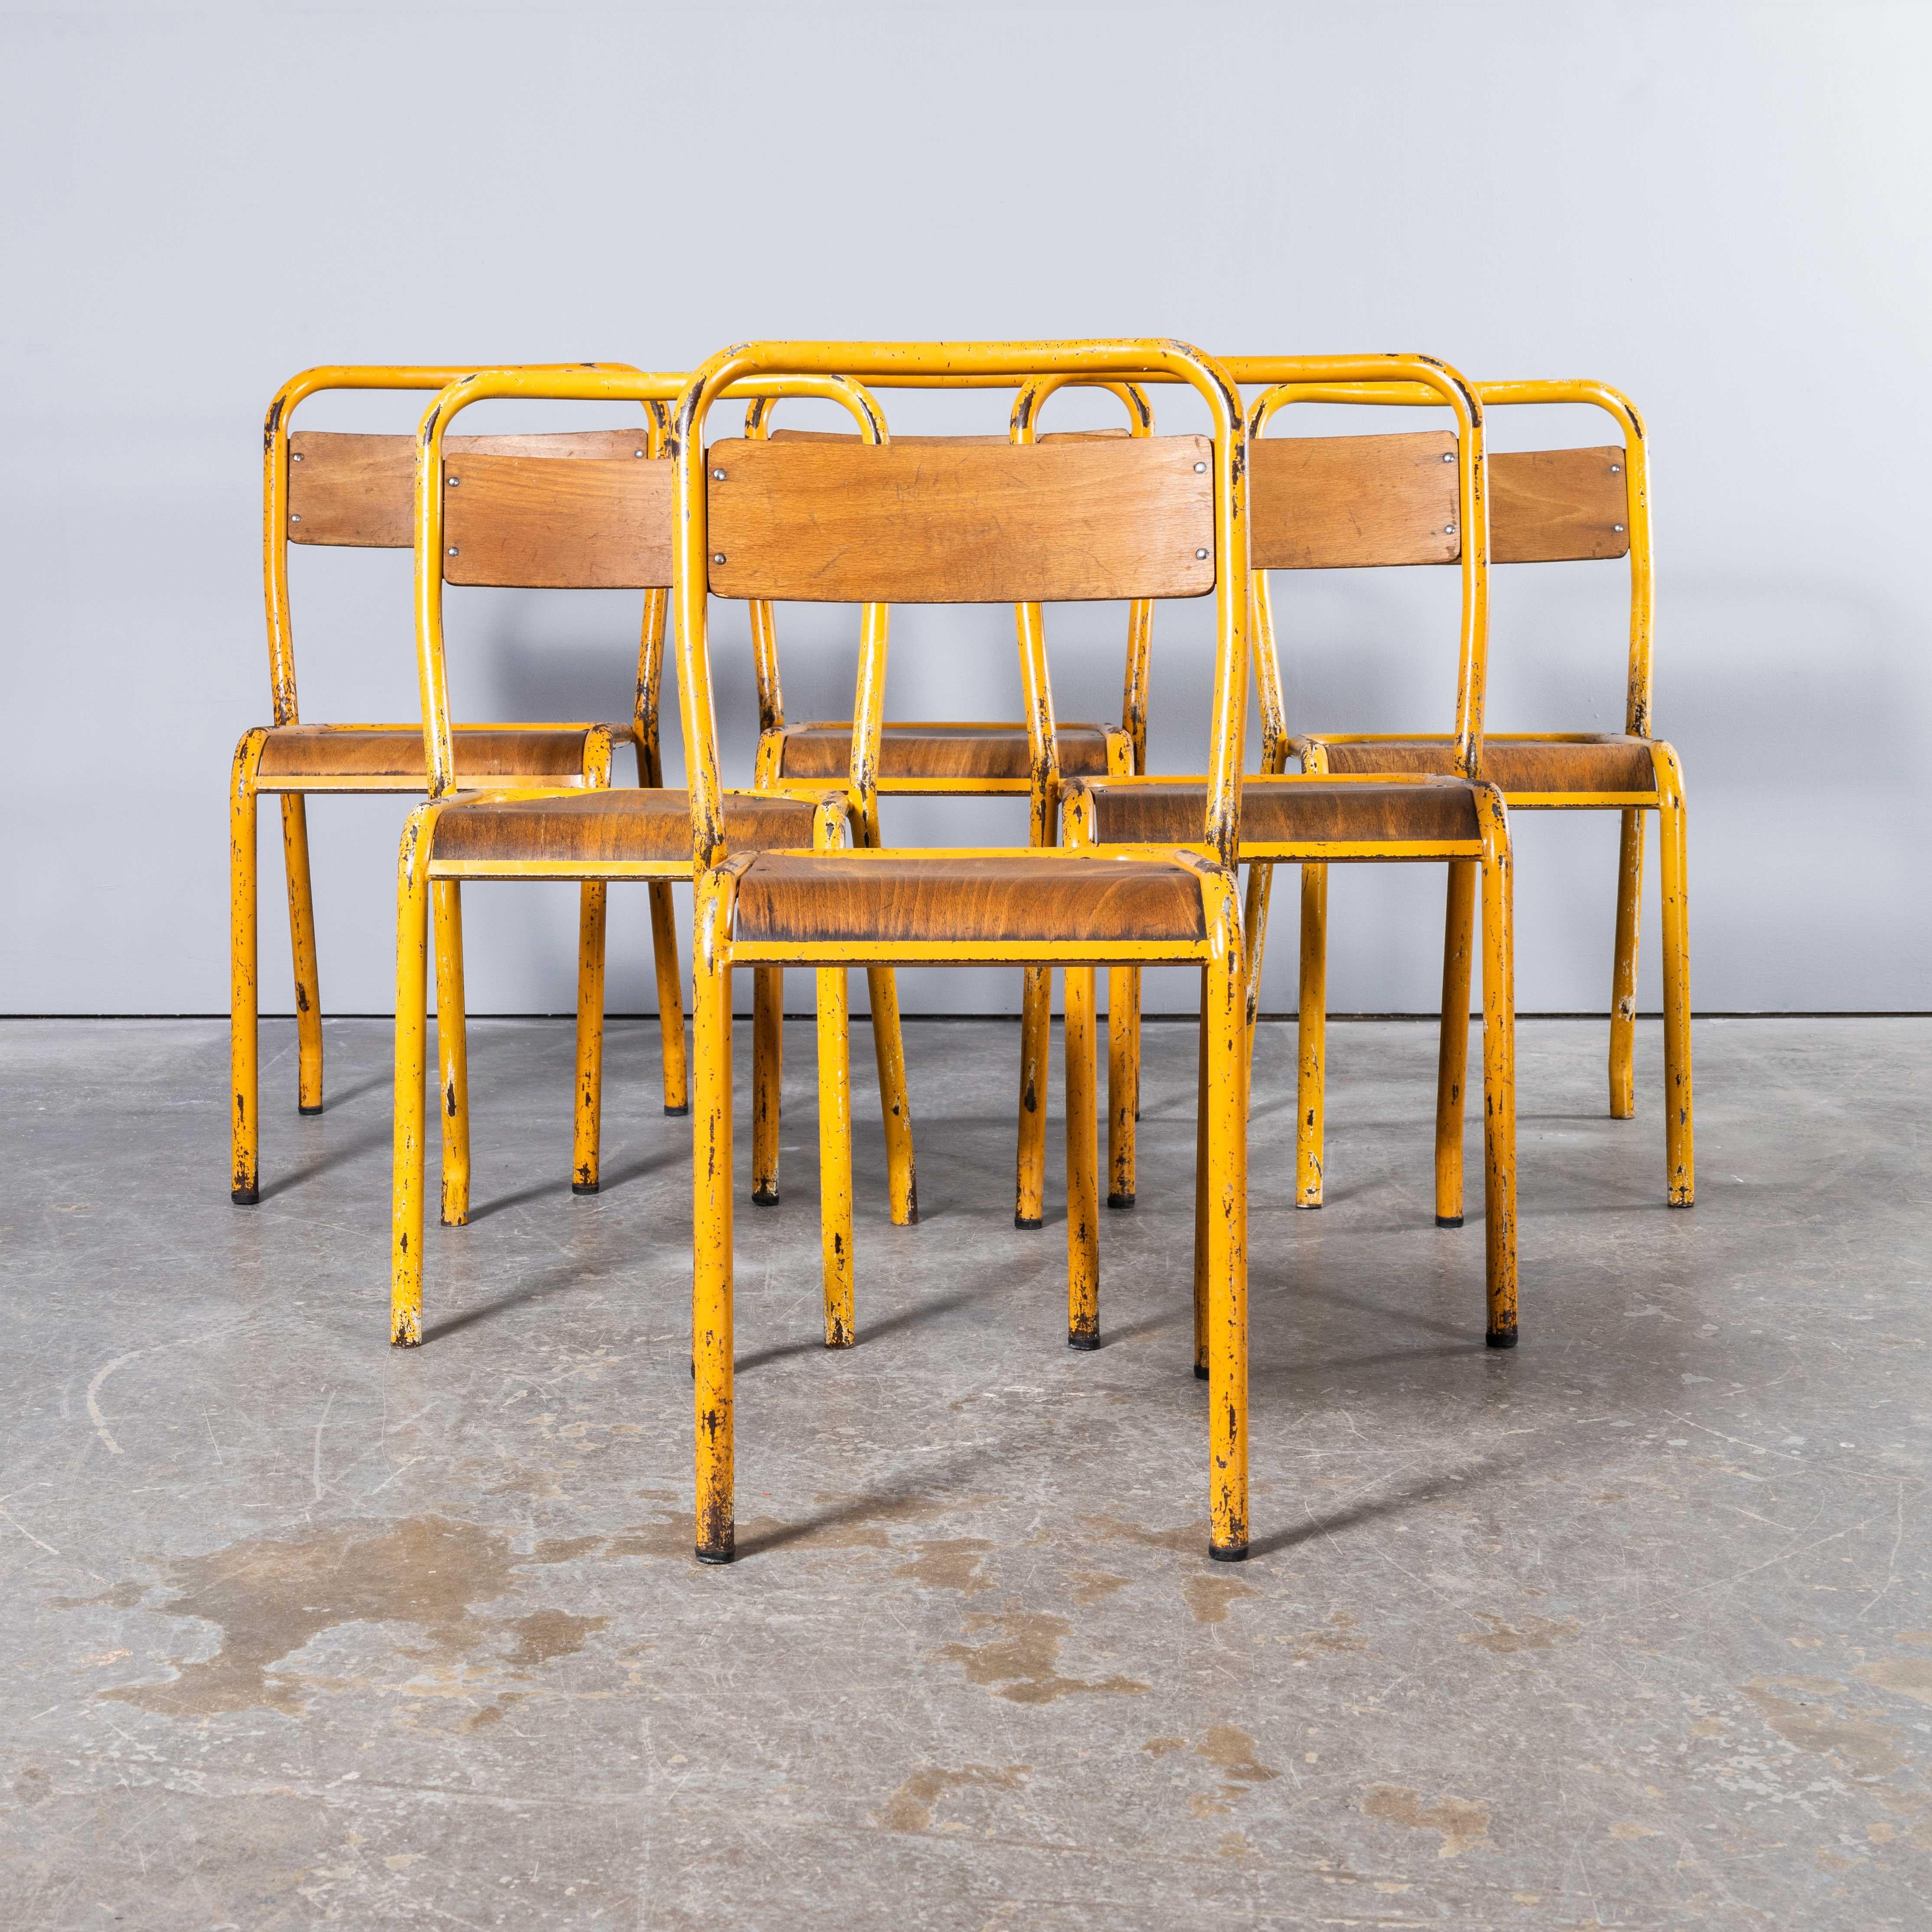 1950's Original Yellow French Tolix Wood Seat Metal Bistro Dining Chair - Large  For Sale 1